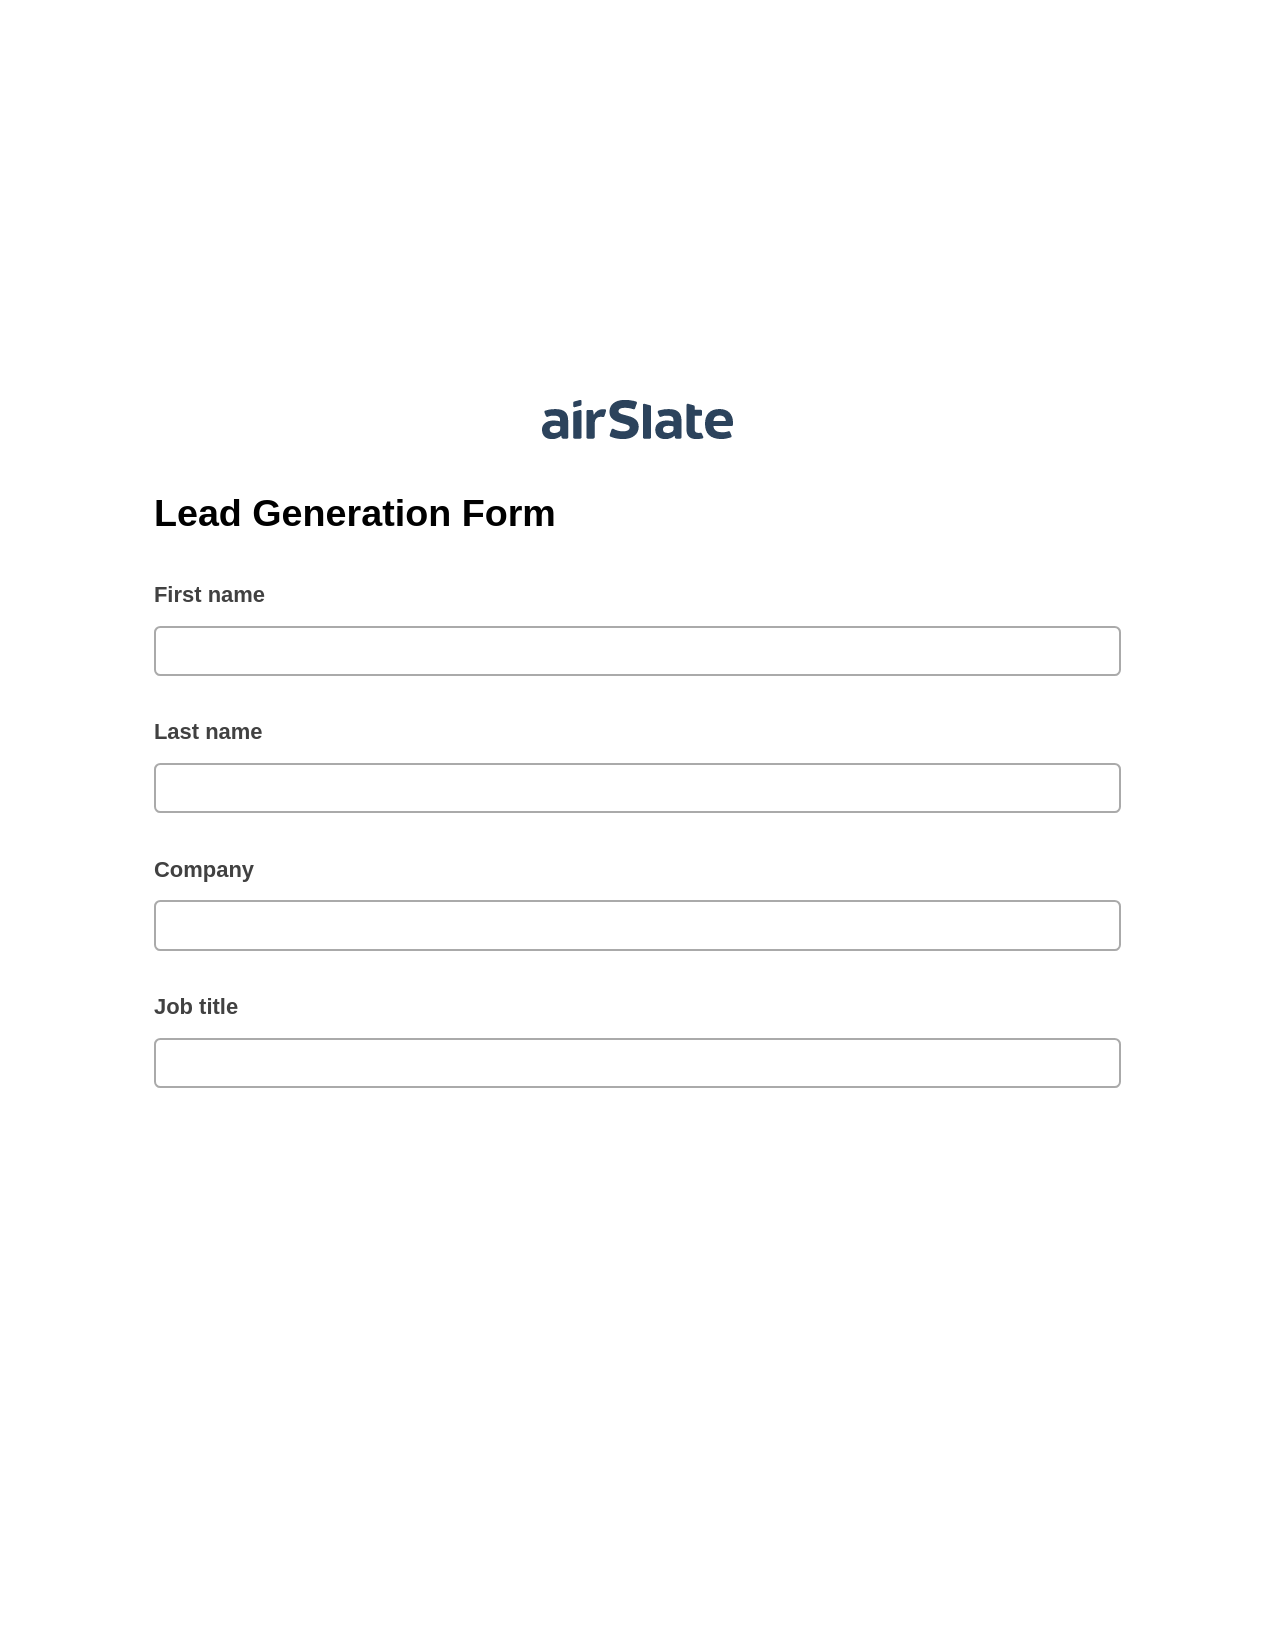 Lead Generation Form Pre-fill Dropdowns from Airtable, Invoke Salesforce Process Bot, Archive to SharePoint Folder Bot